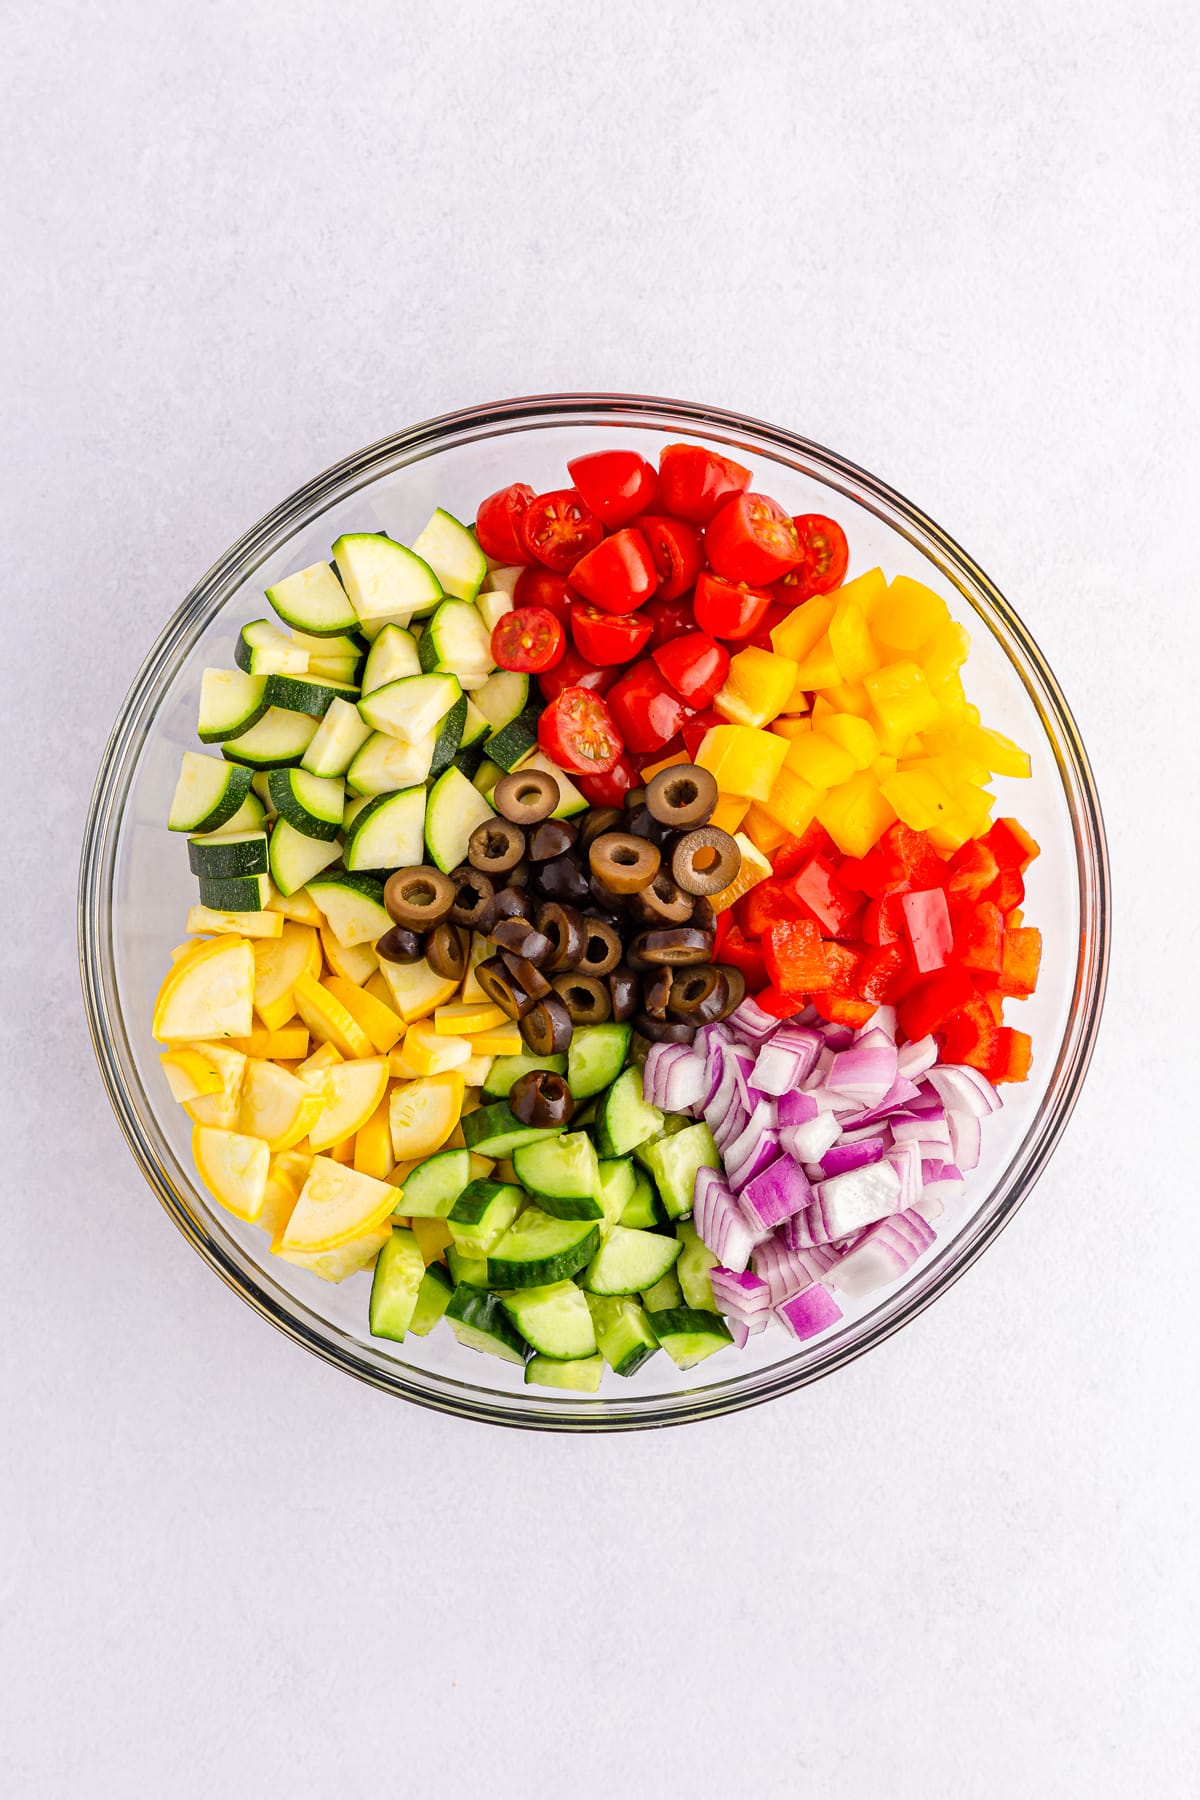 Mixing all ingredients for California Spaghetti Salad include spaghetti, cherry or grape tomatoes, English cucumber, red bell pepper, yellow bell pepper, red onion, black olives, yellow squash diced, and Zucchini